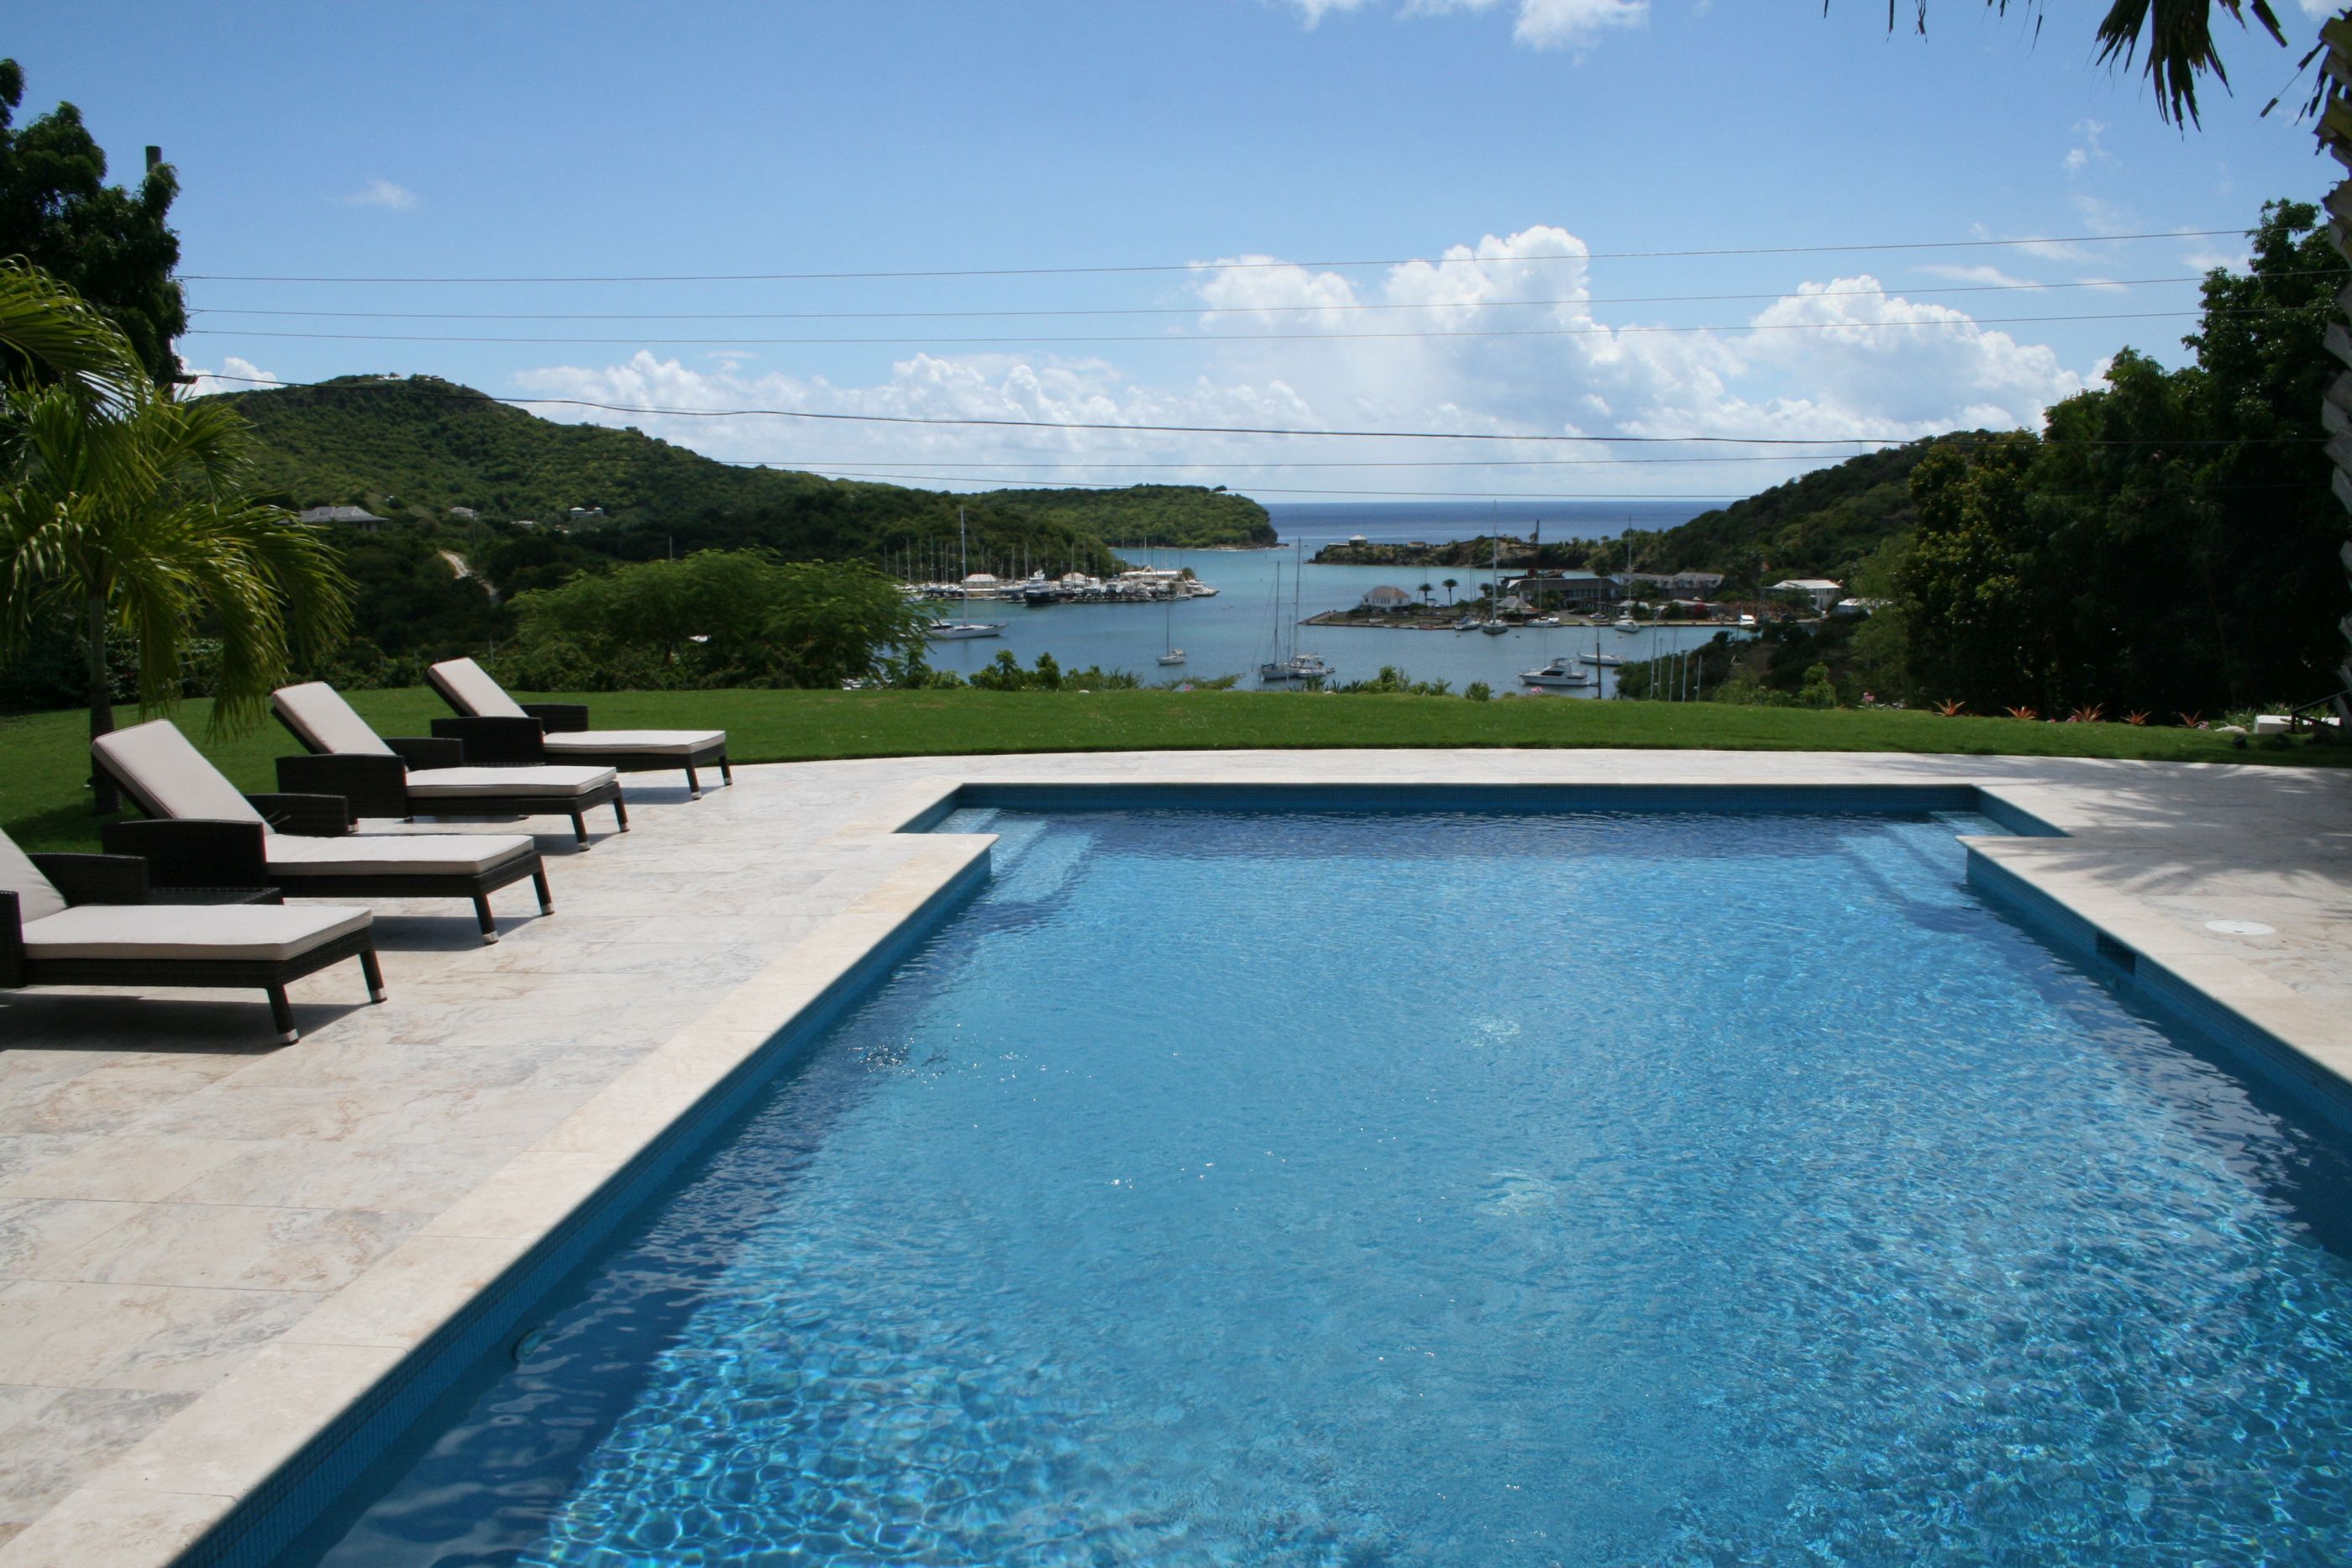 Swimming pool and v iew from Hill Club, Antigua